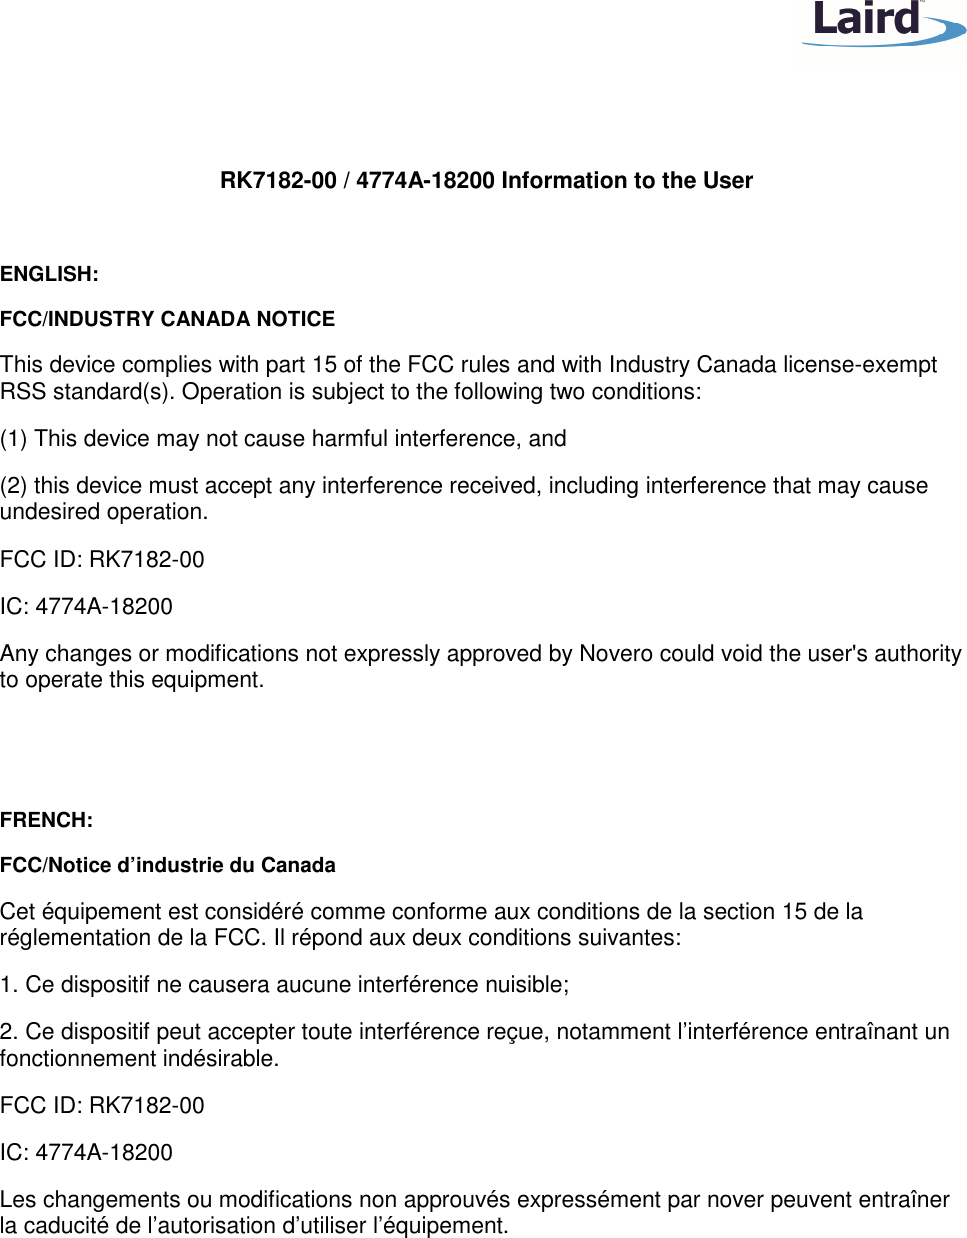    RK7182-00 / 4774A-18200 Information to the User  ENGLISH: FCC/INDUSTRY CANADA NOTICE This device complies with part 15 of the FCC rules and with Industry Canada license-exempt RSS standard(s). Operation is subject to the following two conditions: (1) This device may not cause harmful interference, and (2) this device must accept any interference received, including interference that may cause undesired operation. FCC ID: RK7182-00 IC: 4774A-18200 Any changes or modifications not expressly approved by Novero could void the user&apos;s authority to operate this equipment.   FRENCH: FCC/Notice d’industrie du Canada Cet équipement est considéré comme conforme aux conditions de la section 15 de la réglementation de la FCC. Il répond aux deux conditions suivantes: 1. Ce dispositif ne causera aucune interférence nuisible; 2. Ce dispositif peut accepter toute interférence reçue, notamment l’interférence entraînant un fonctionnement indésirable. FCC ID: RK7182-00 IC: 4774A-18200 Les changements ou modifications non approuvés expressément par nover peuvent entraîner la caducité de l’autorisation d’utiliser l’équipement.  